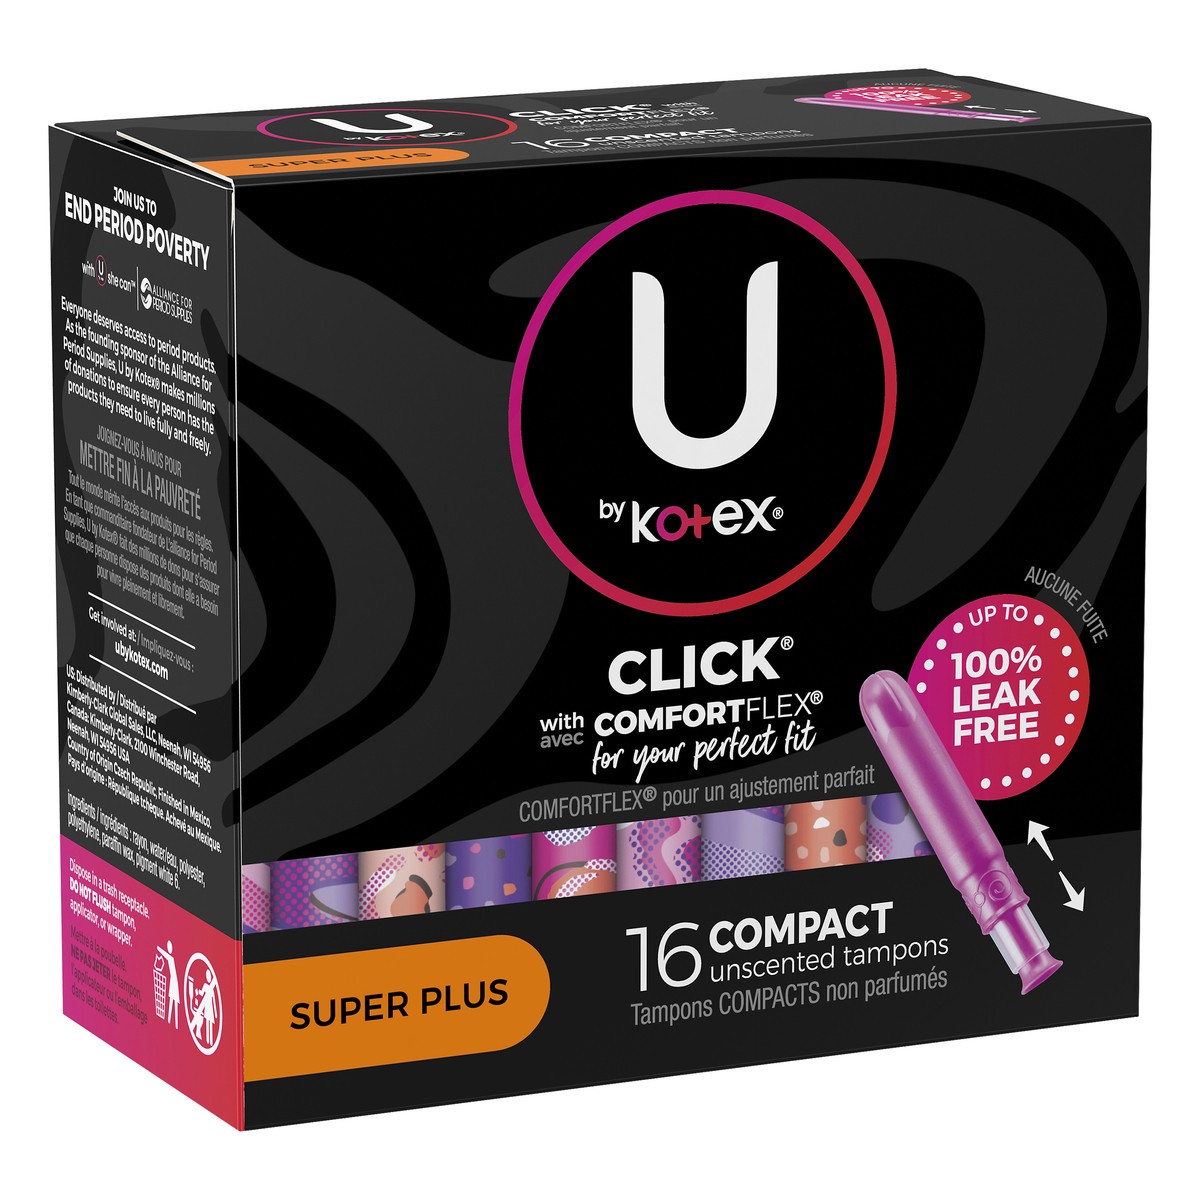 slide 2 of 9, U by Kotex Super Plus Click Compact Tampons, 16 ct